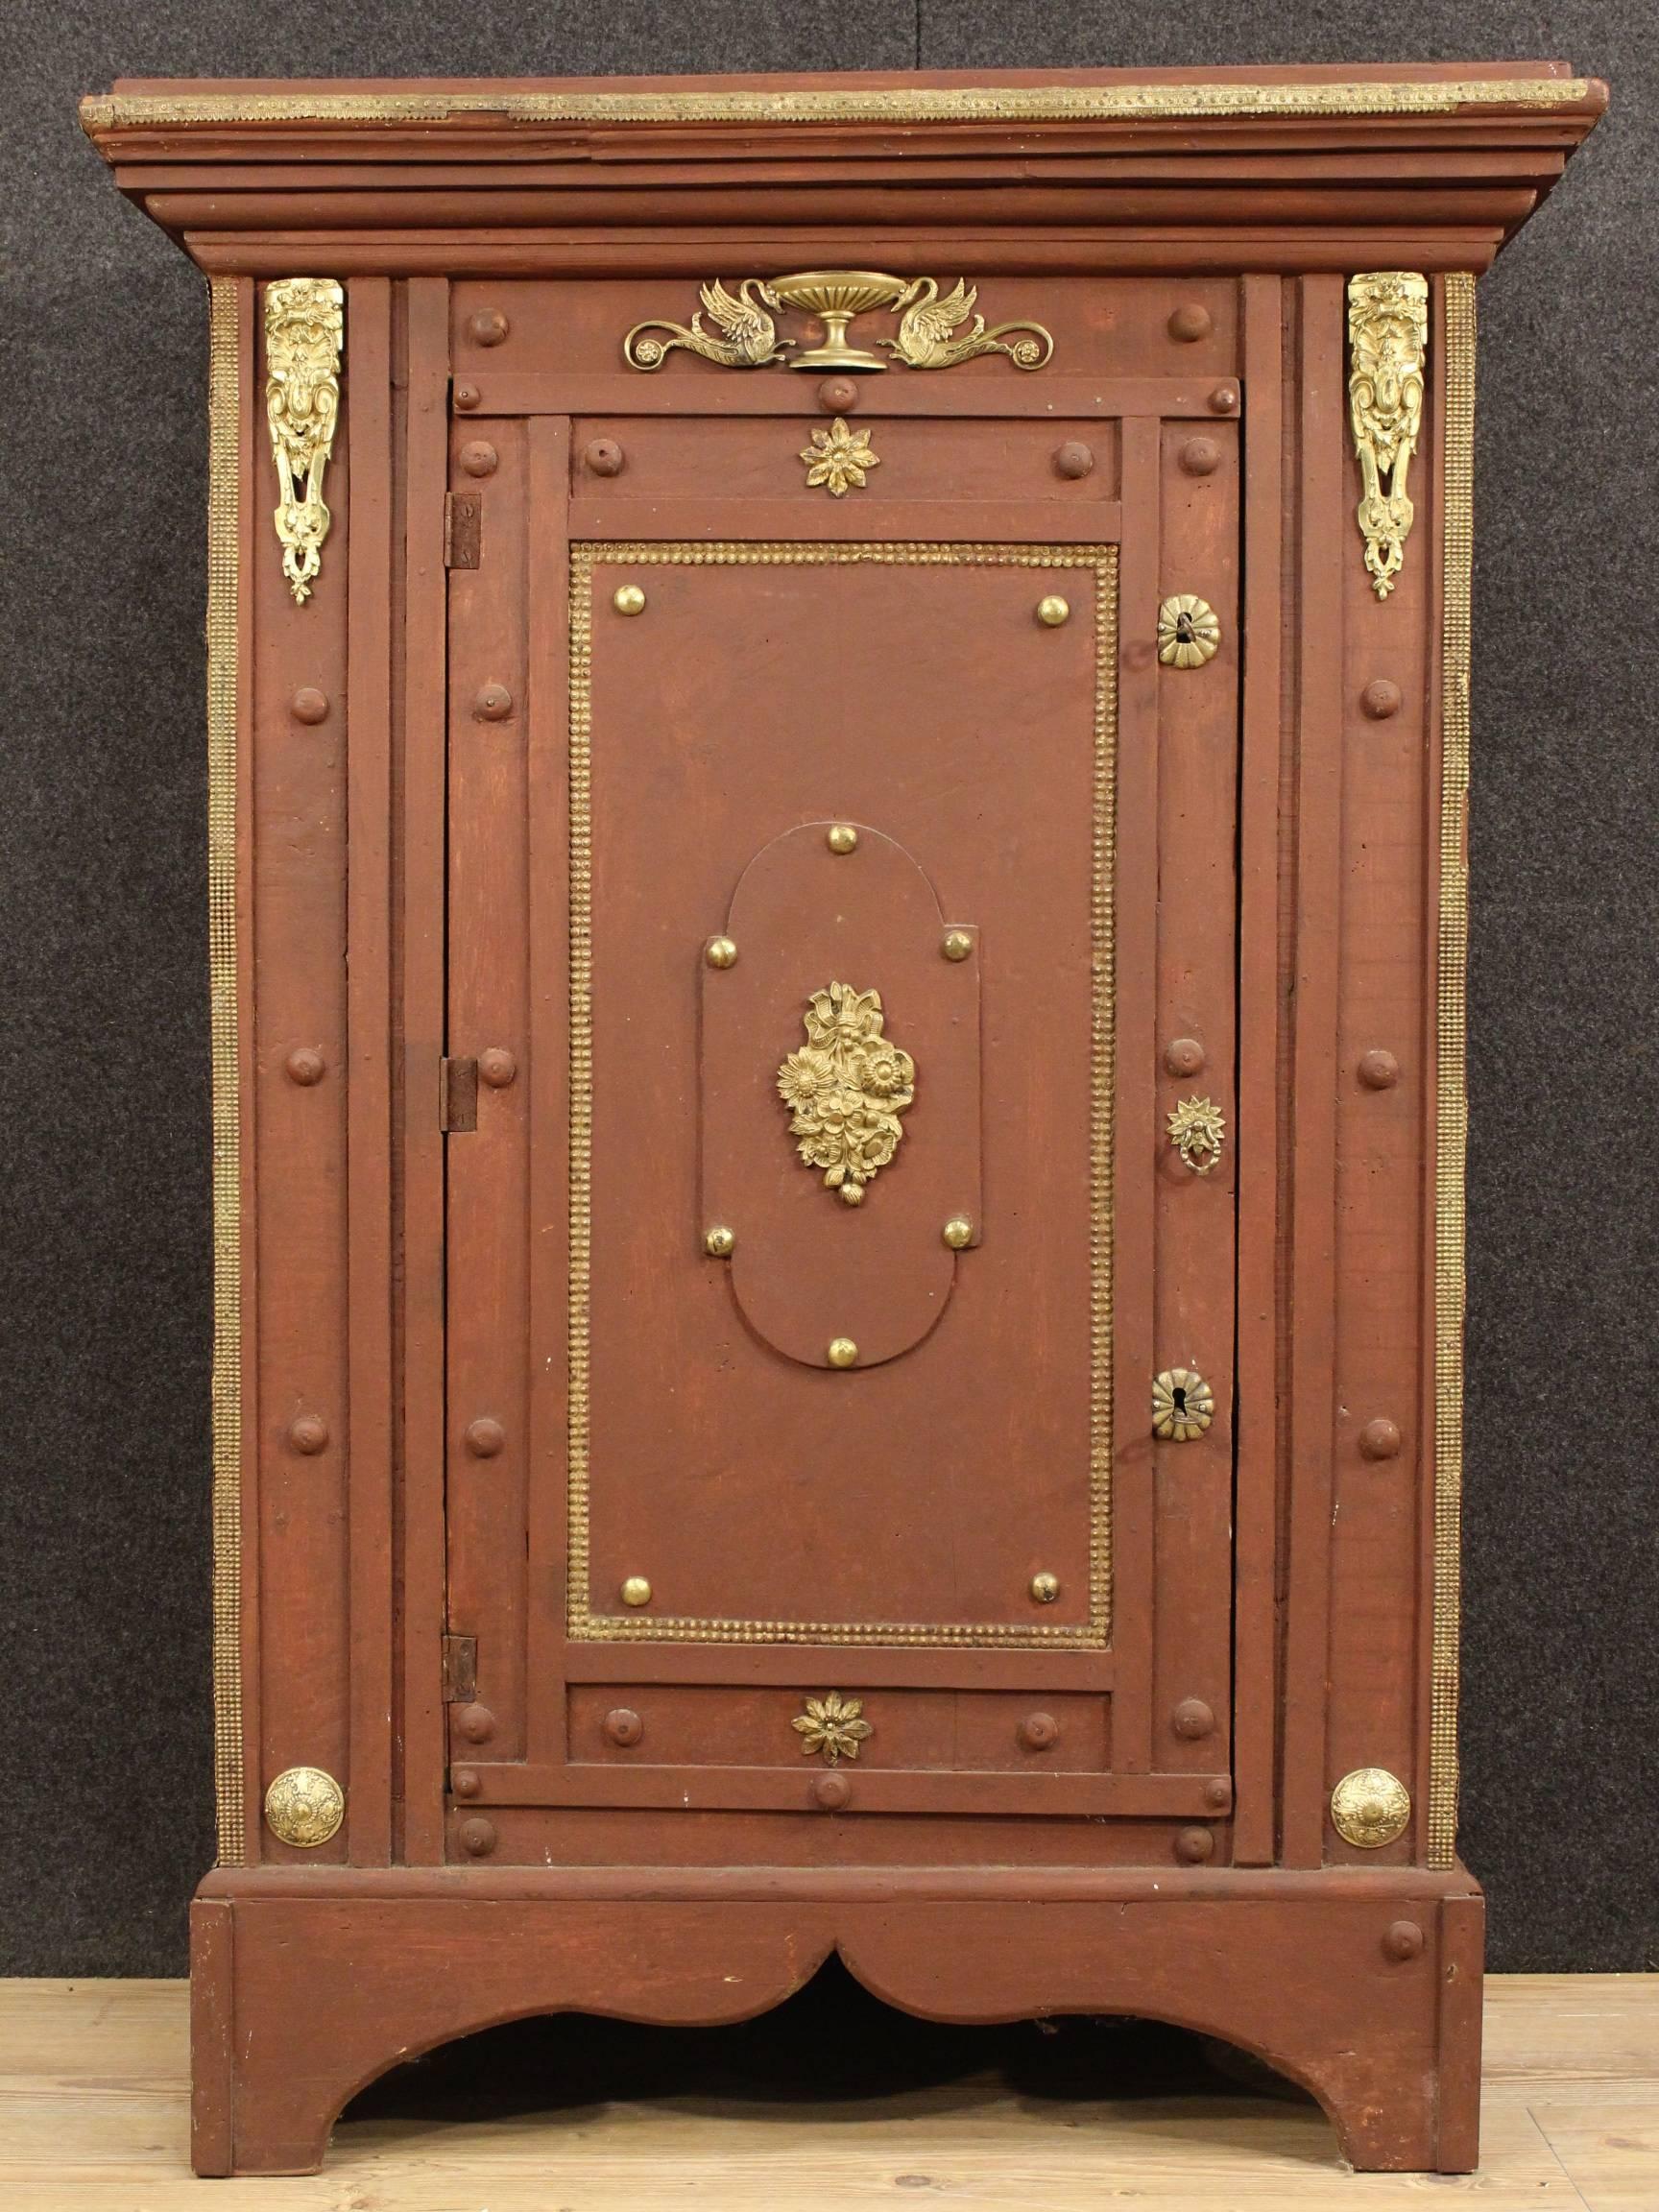 Particular Italian cabinet of the 20th century. Furniture in nicely carved and painted wood, richly decorated with gilt and chiseled brass. Cabinet 